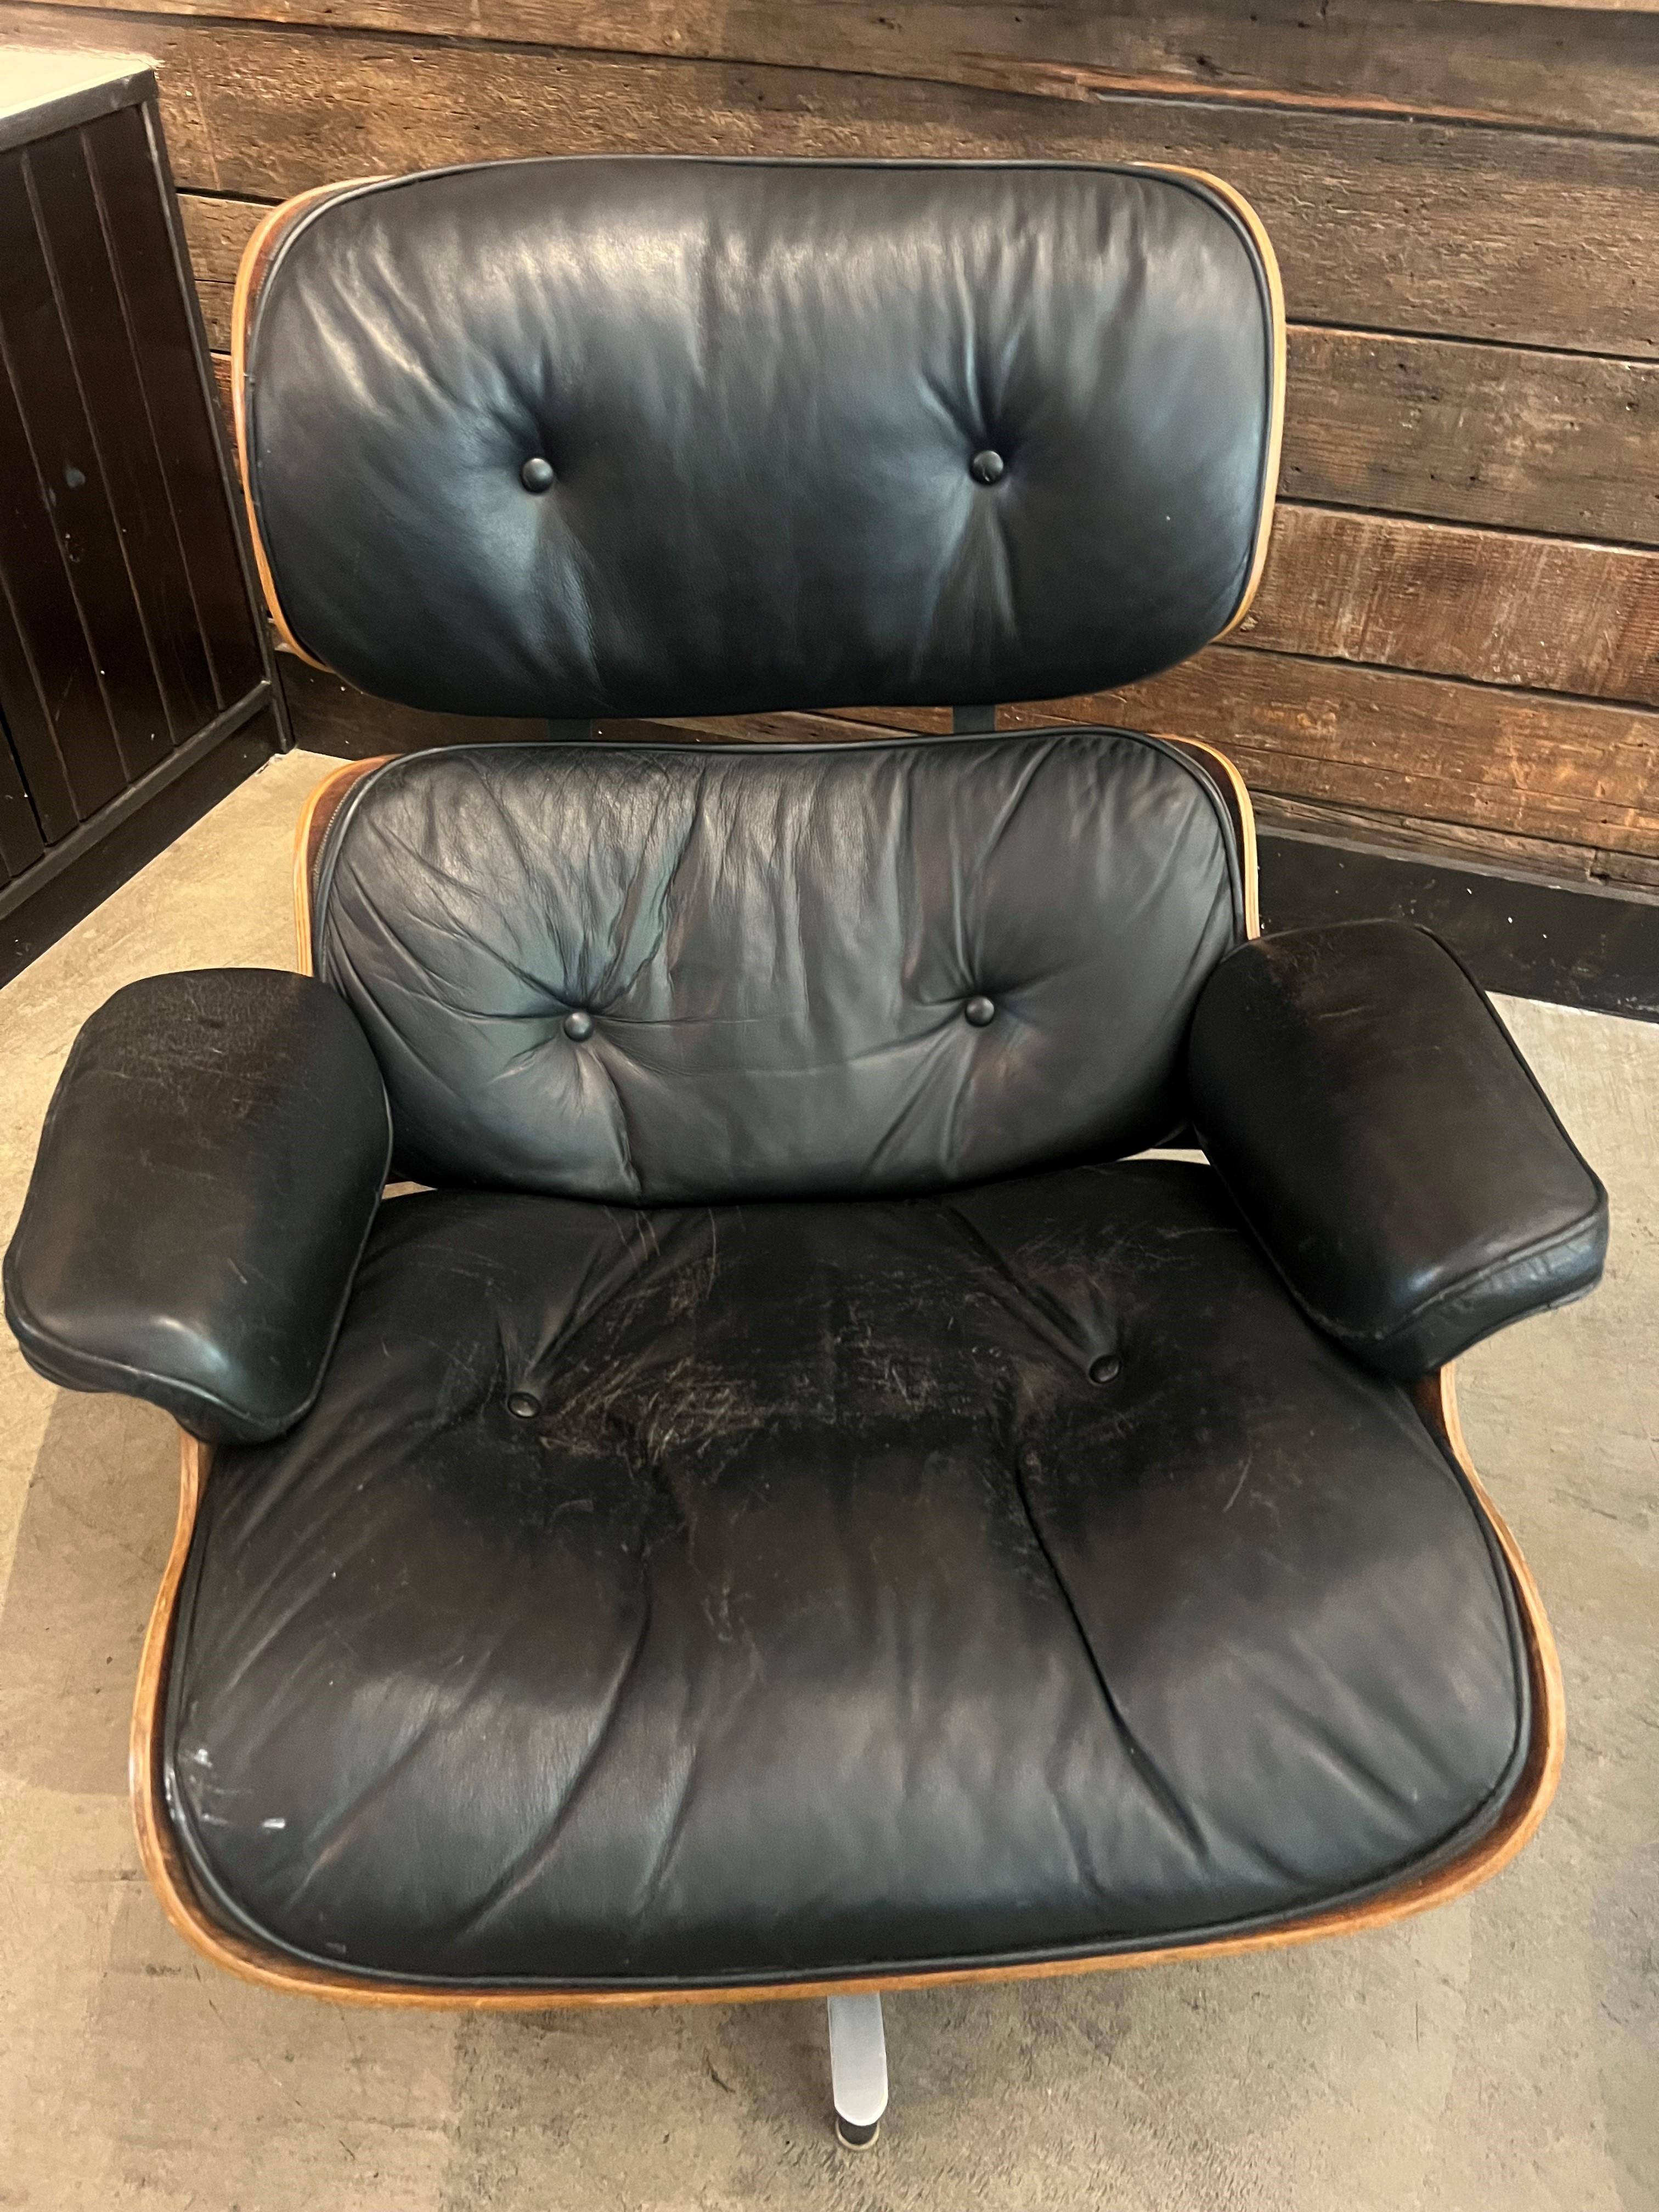 The Lounge Chair and Ottoman is an iconic furniture design created by Charles and Ray Eames. It is widely regarded as one of the most significant and enduring pieces of modern furniture.

Designed in 1956, the Lounge Chair and Ottoman were